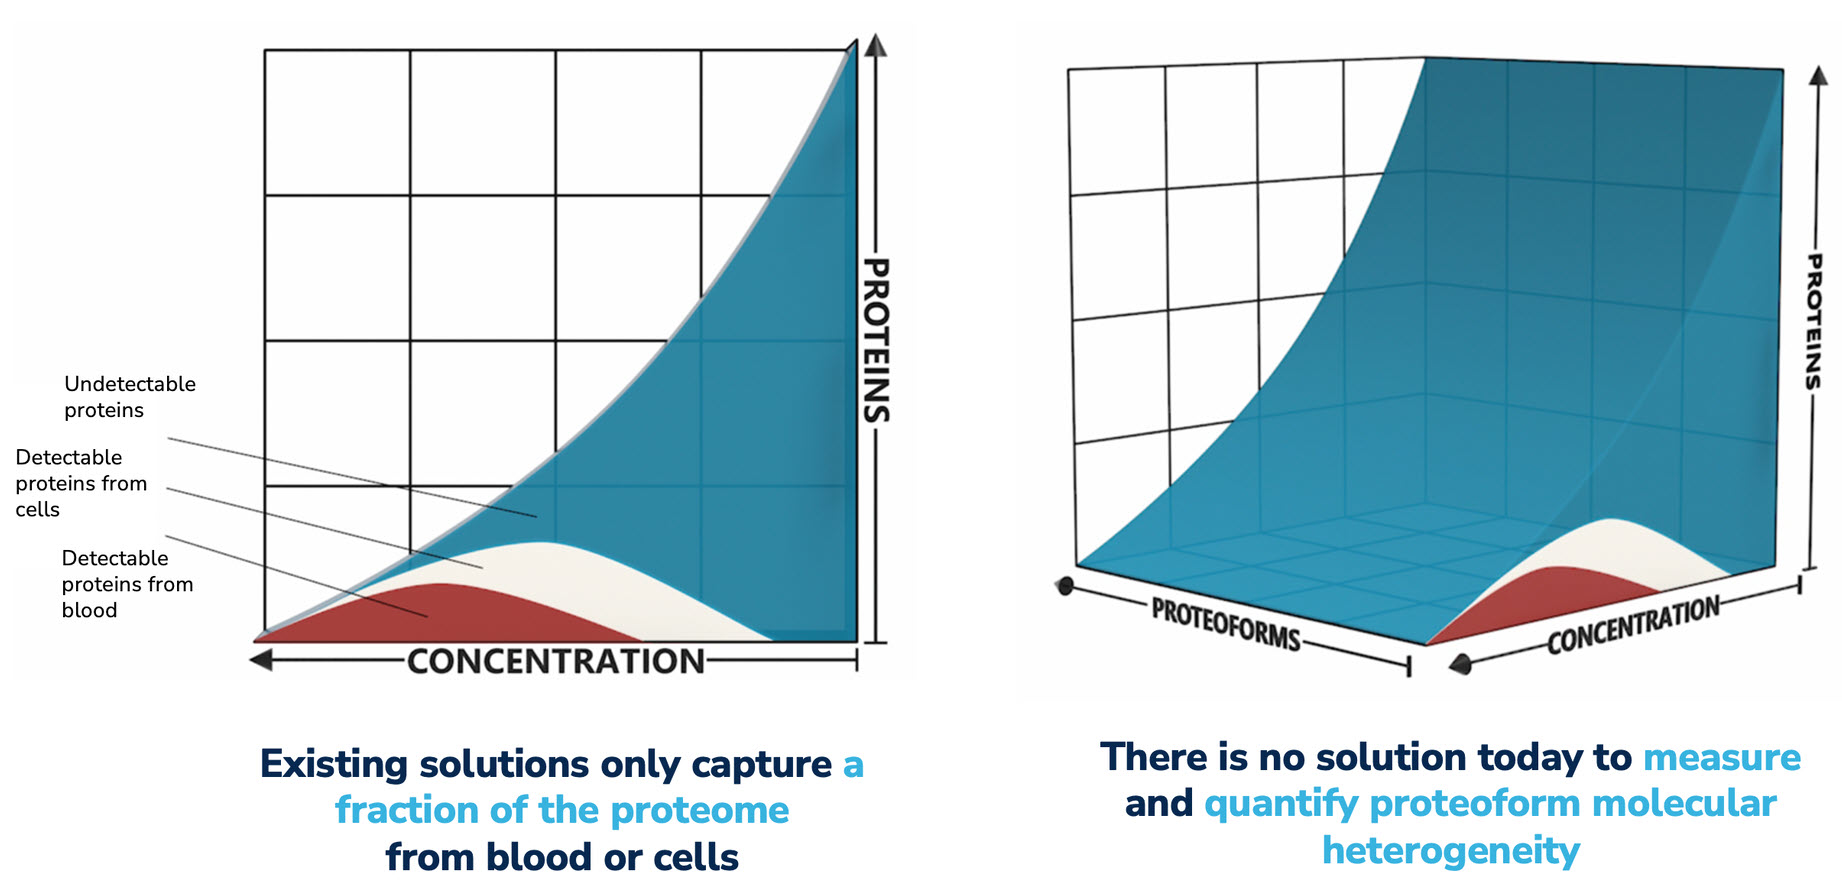 Current Technologies are Unable to Routinely Access the Full Proteome or Detect Proteoform.jpg